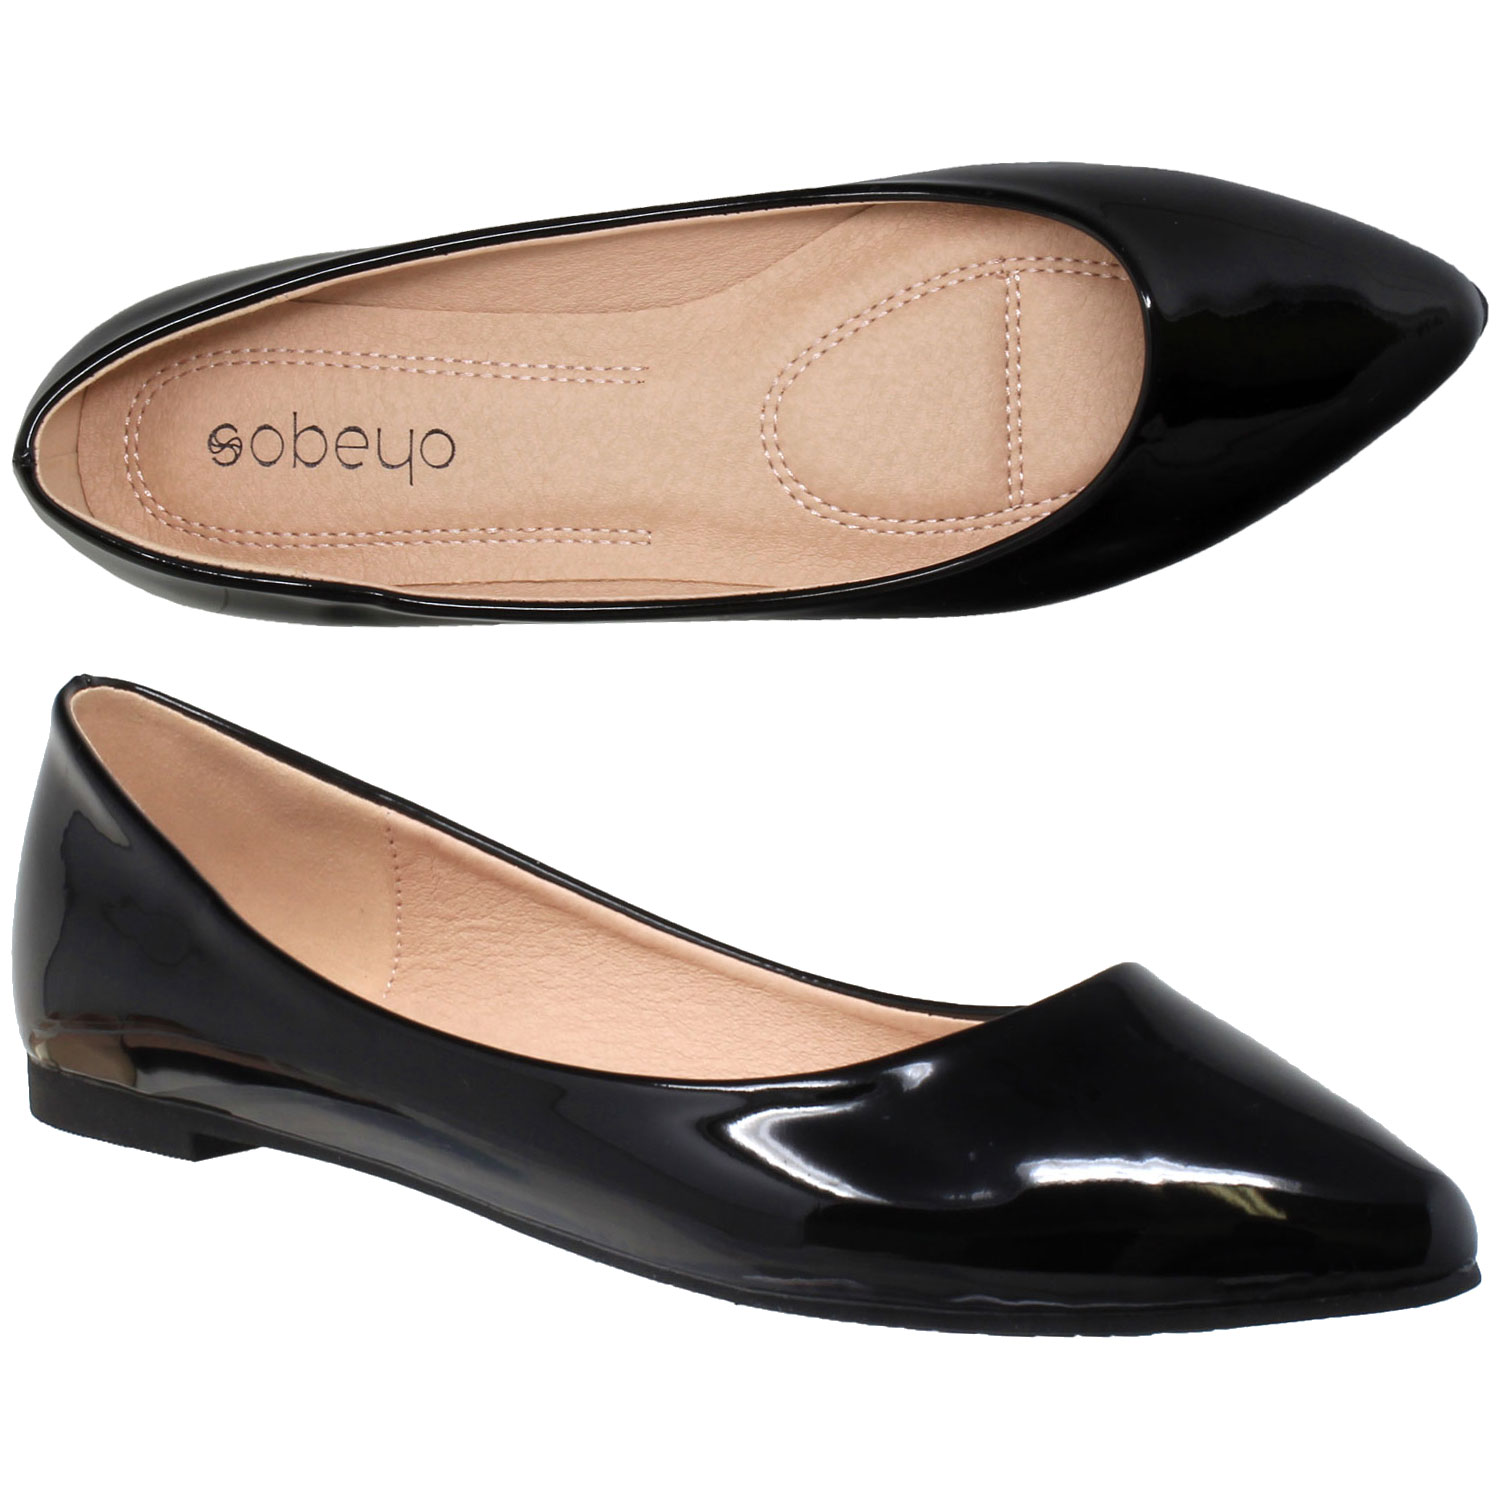 SOBEYO Womens Ballet Flats Patent Leather Pointed Toe Slip On